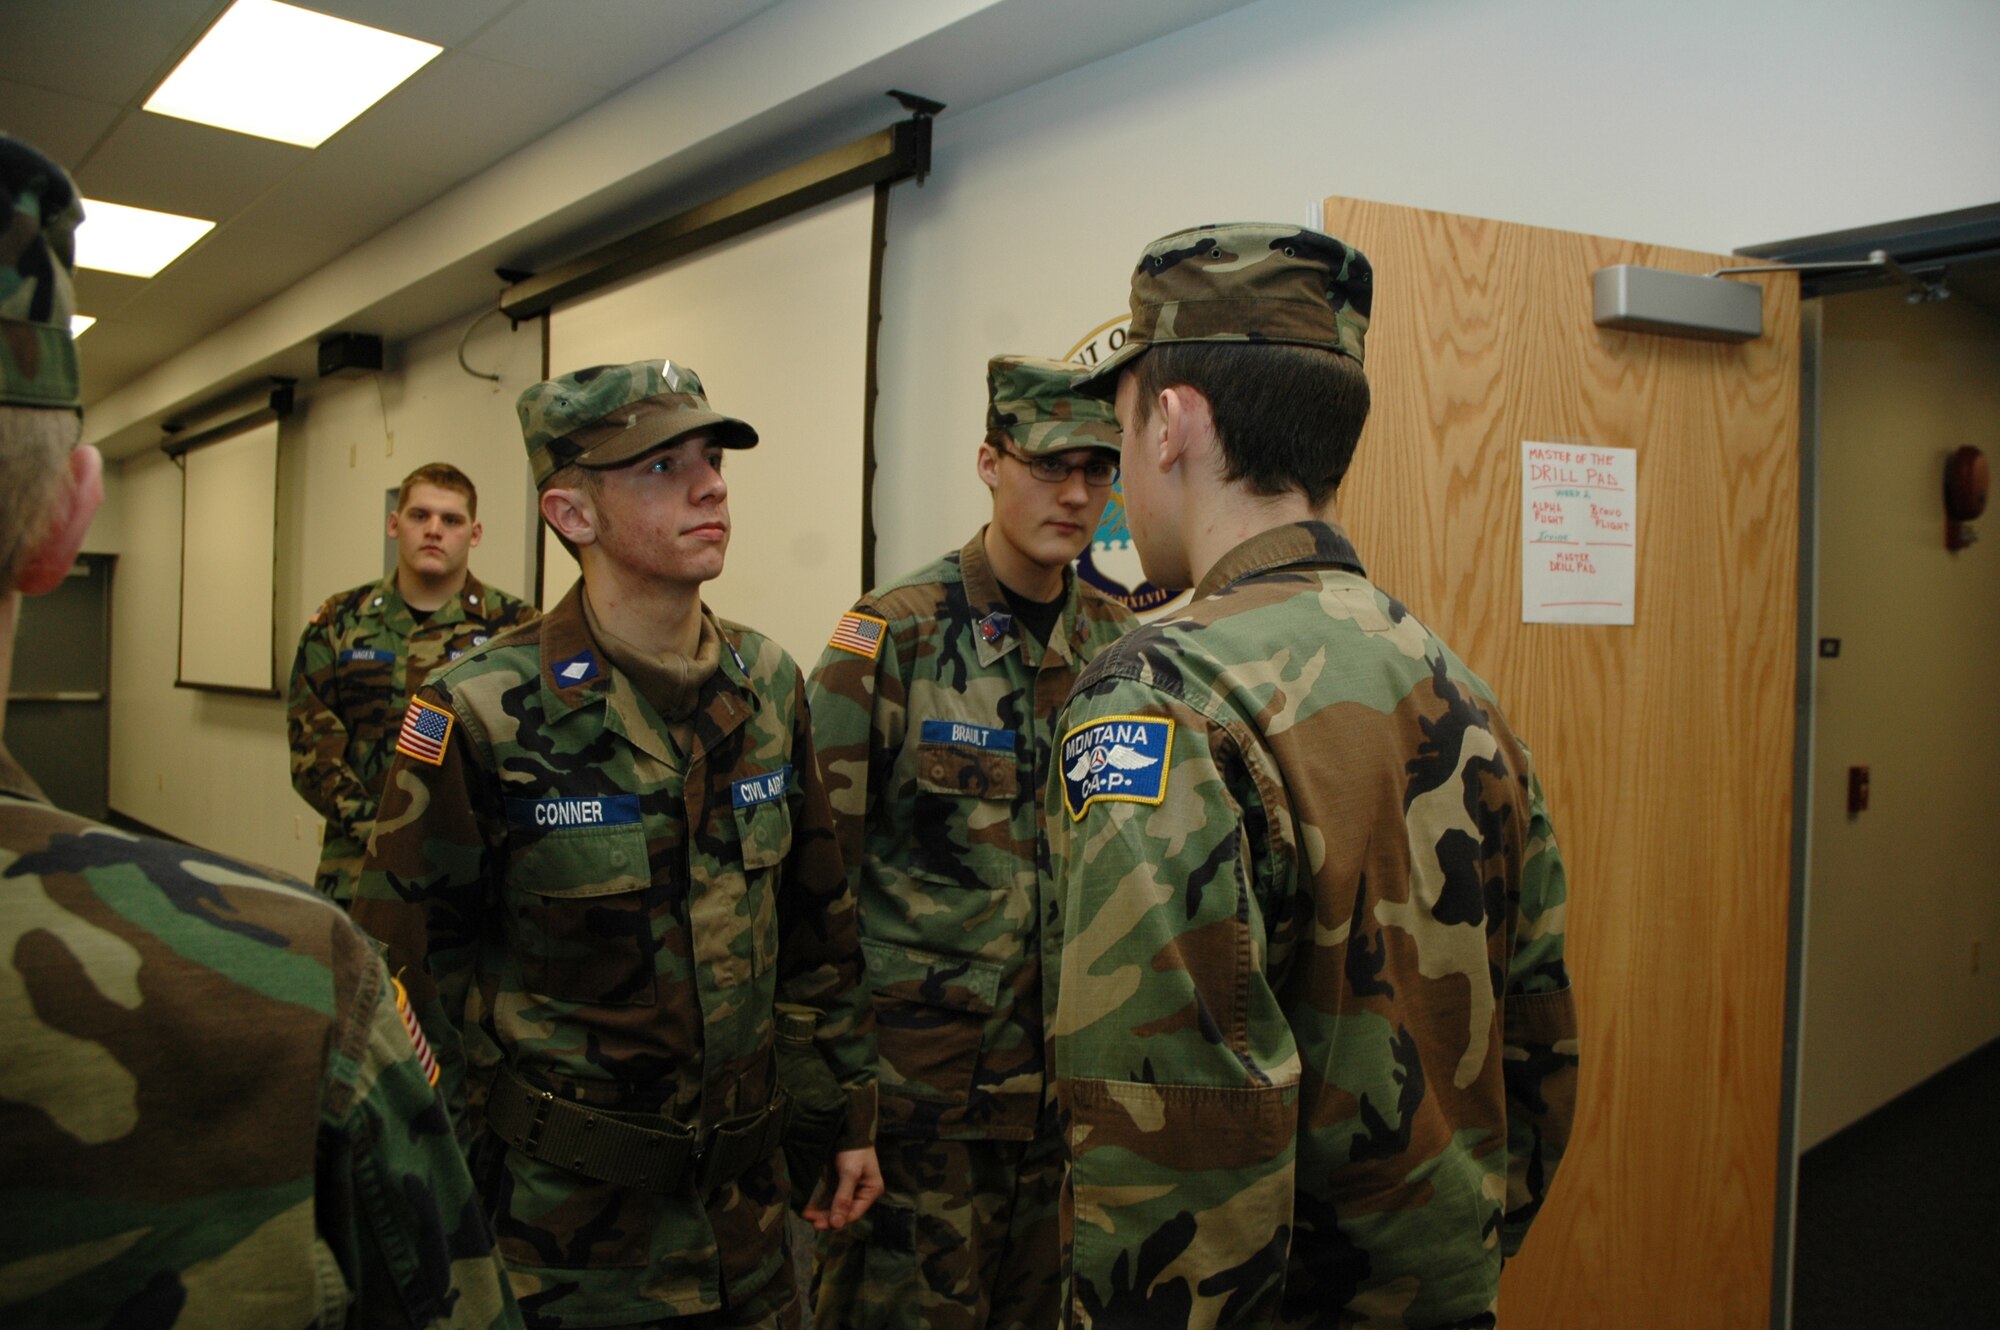 Cadet Maj. Aaron Conner and Cadet Chief Chris Brault perform uniform inspections during a Civil Air Patrol encampment held at Malmstrom from Jan. 11 to 27. (U.S. Air Force photo/Airman 1st Class Emerald Ralston)